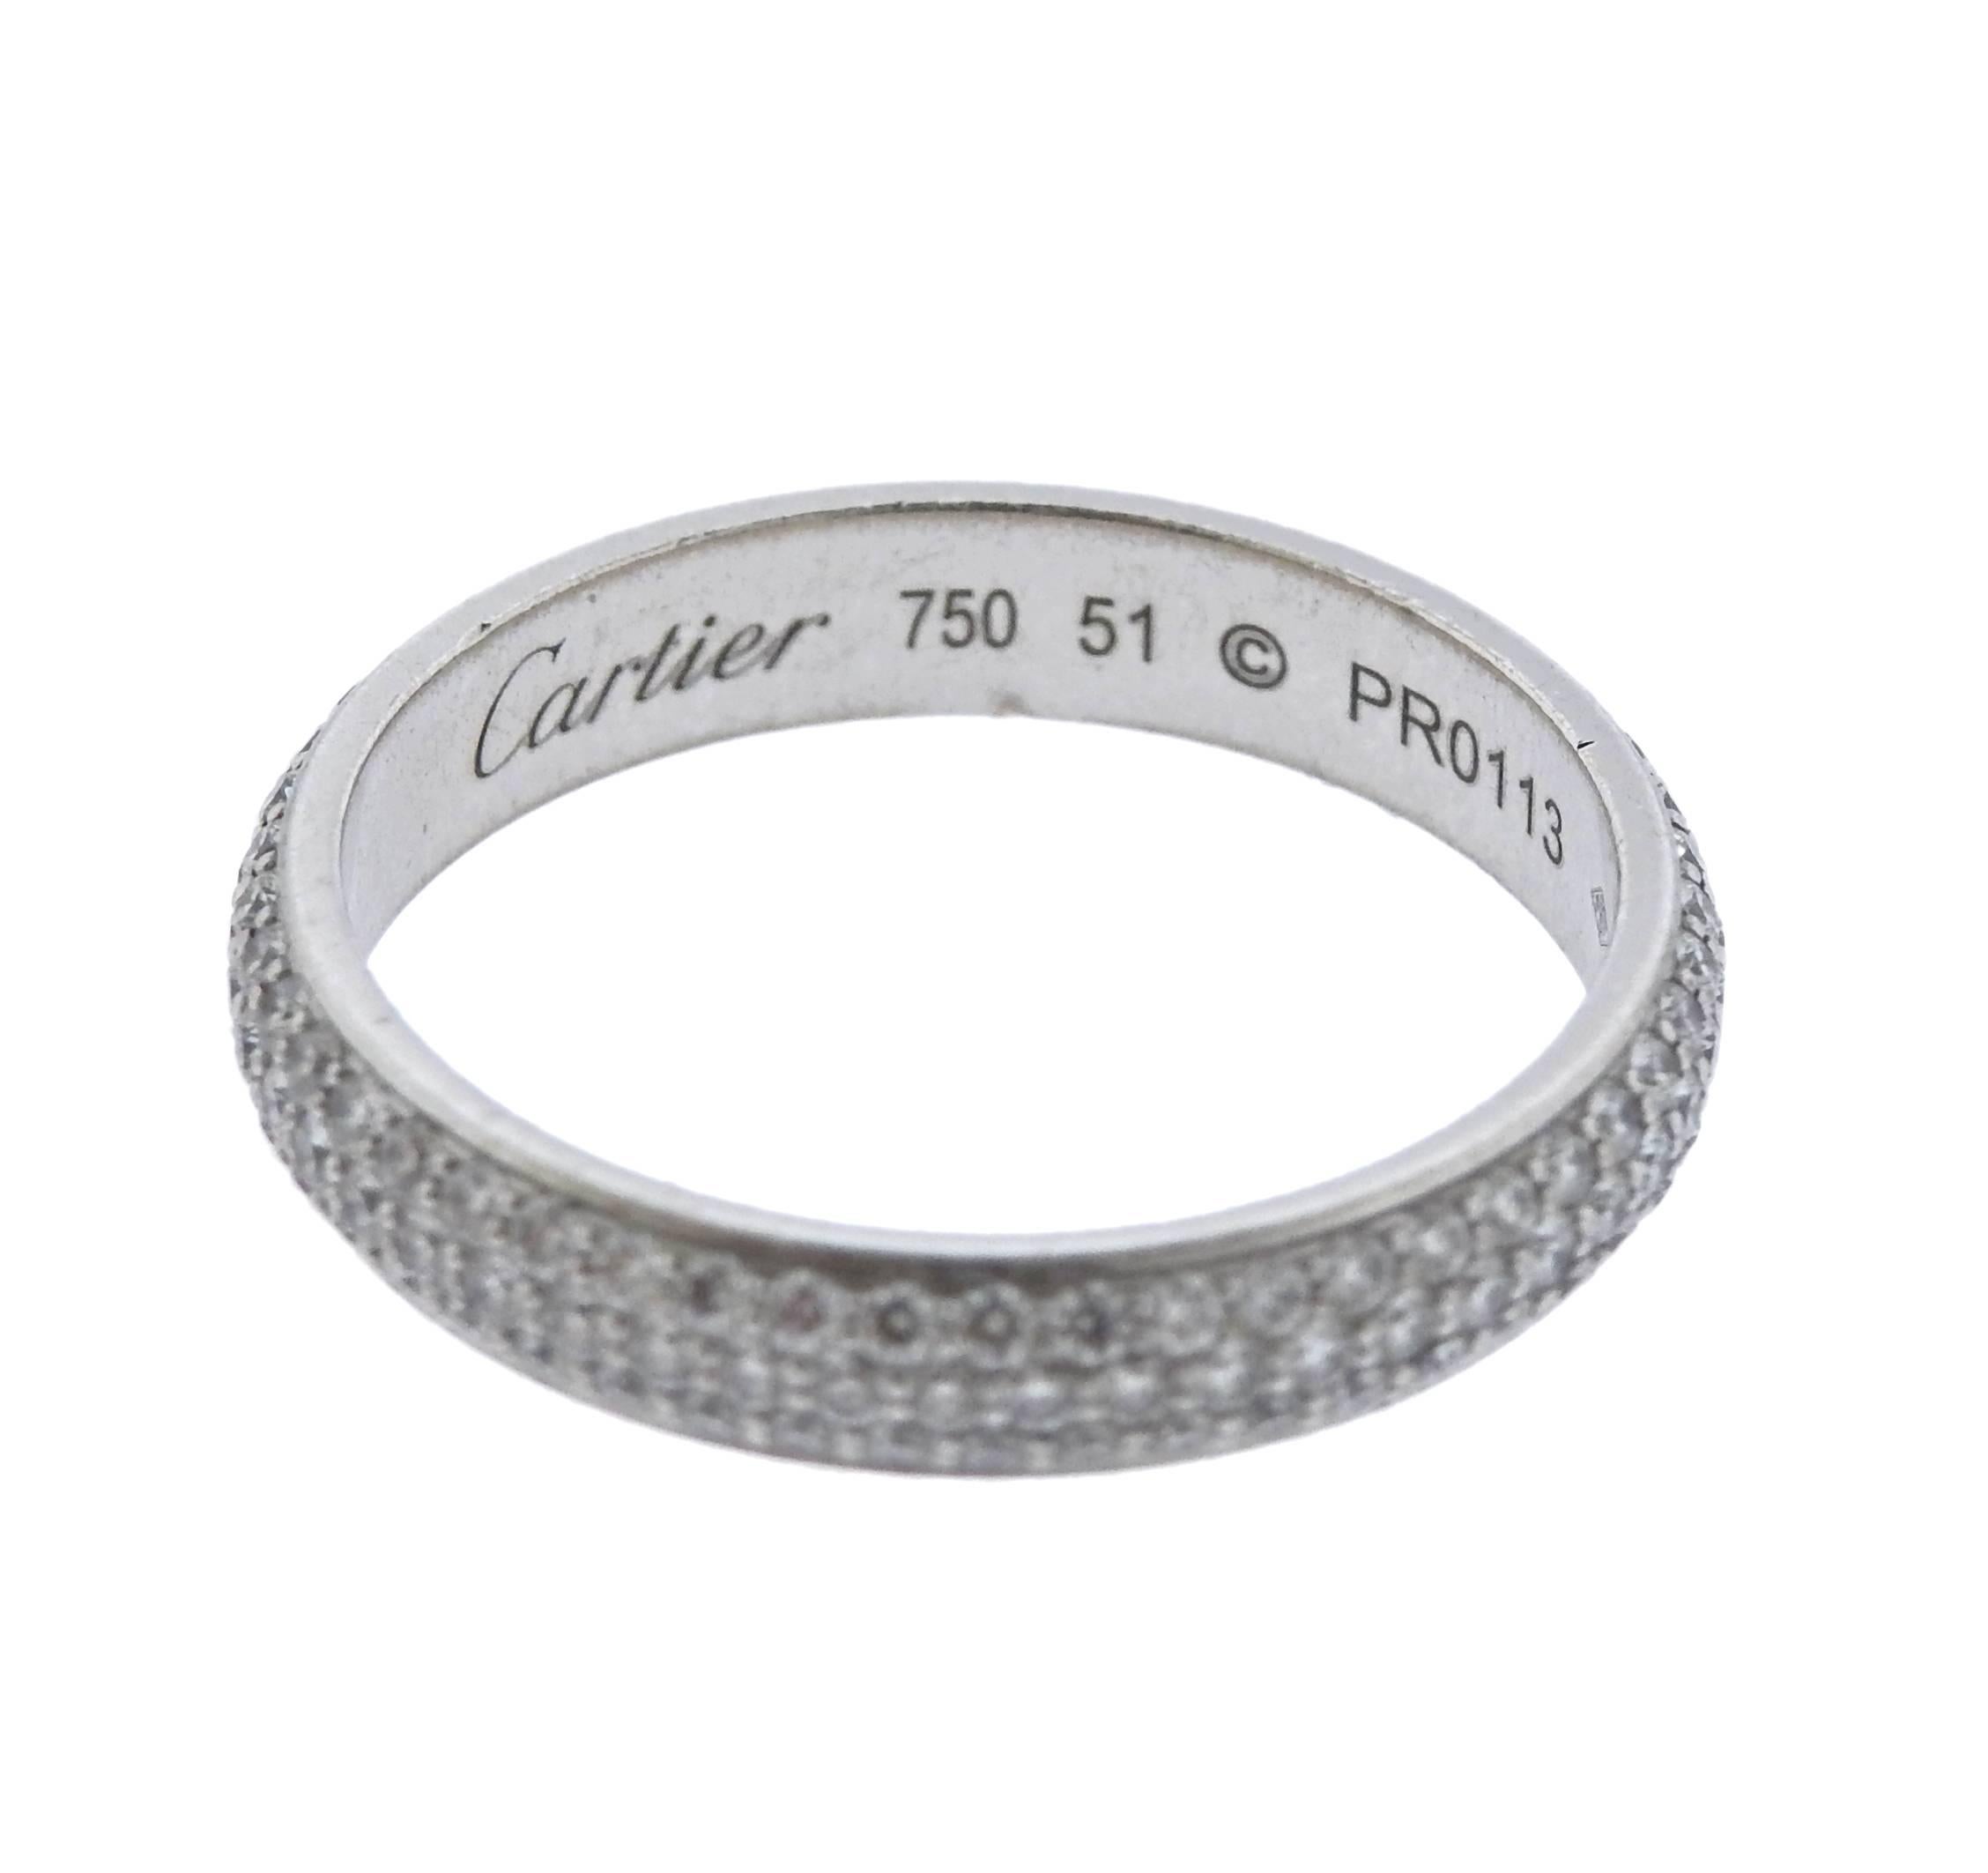 18k white gold eternity wedding band crafted by Cartier. Features approximately 1.10ctw of G/VS diamonds. Ring size 9, ring is 4mm wide. Cartier, 750, 51, PR0113, weight is 4.6 grams. Comes with box.